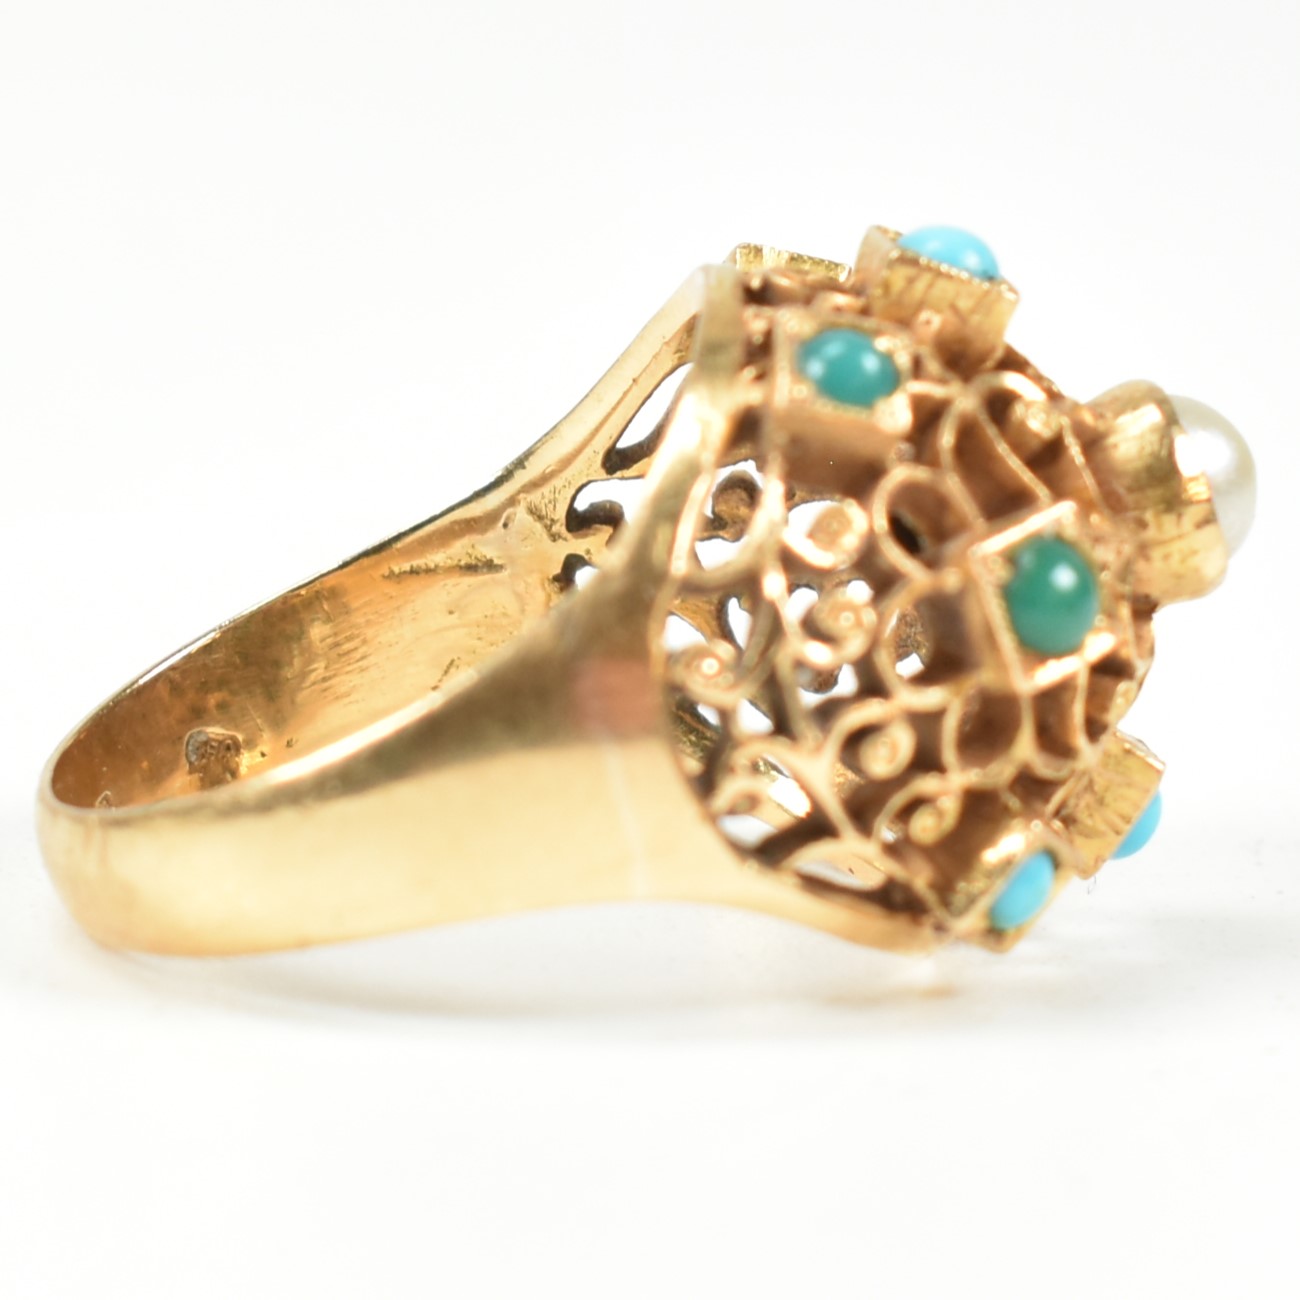 18CT GOLD & TURQUOISE BOMBE RING - Image 6 of 10